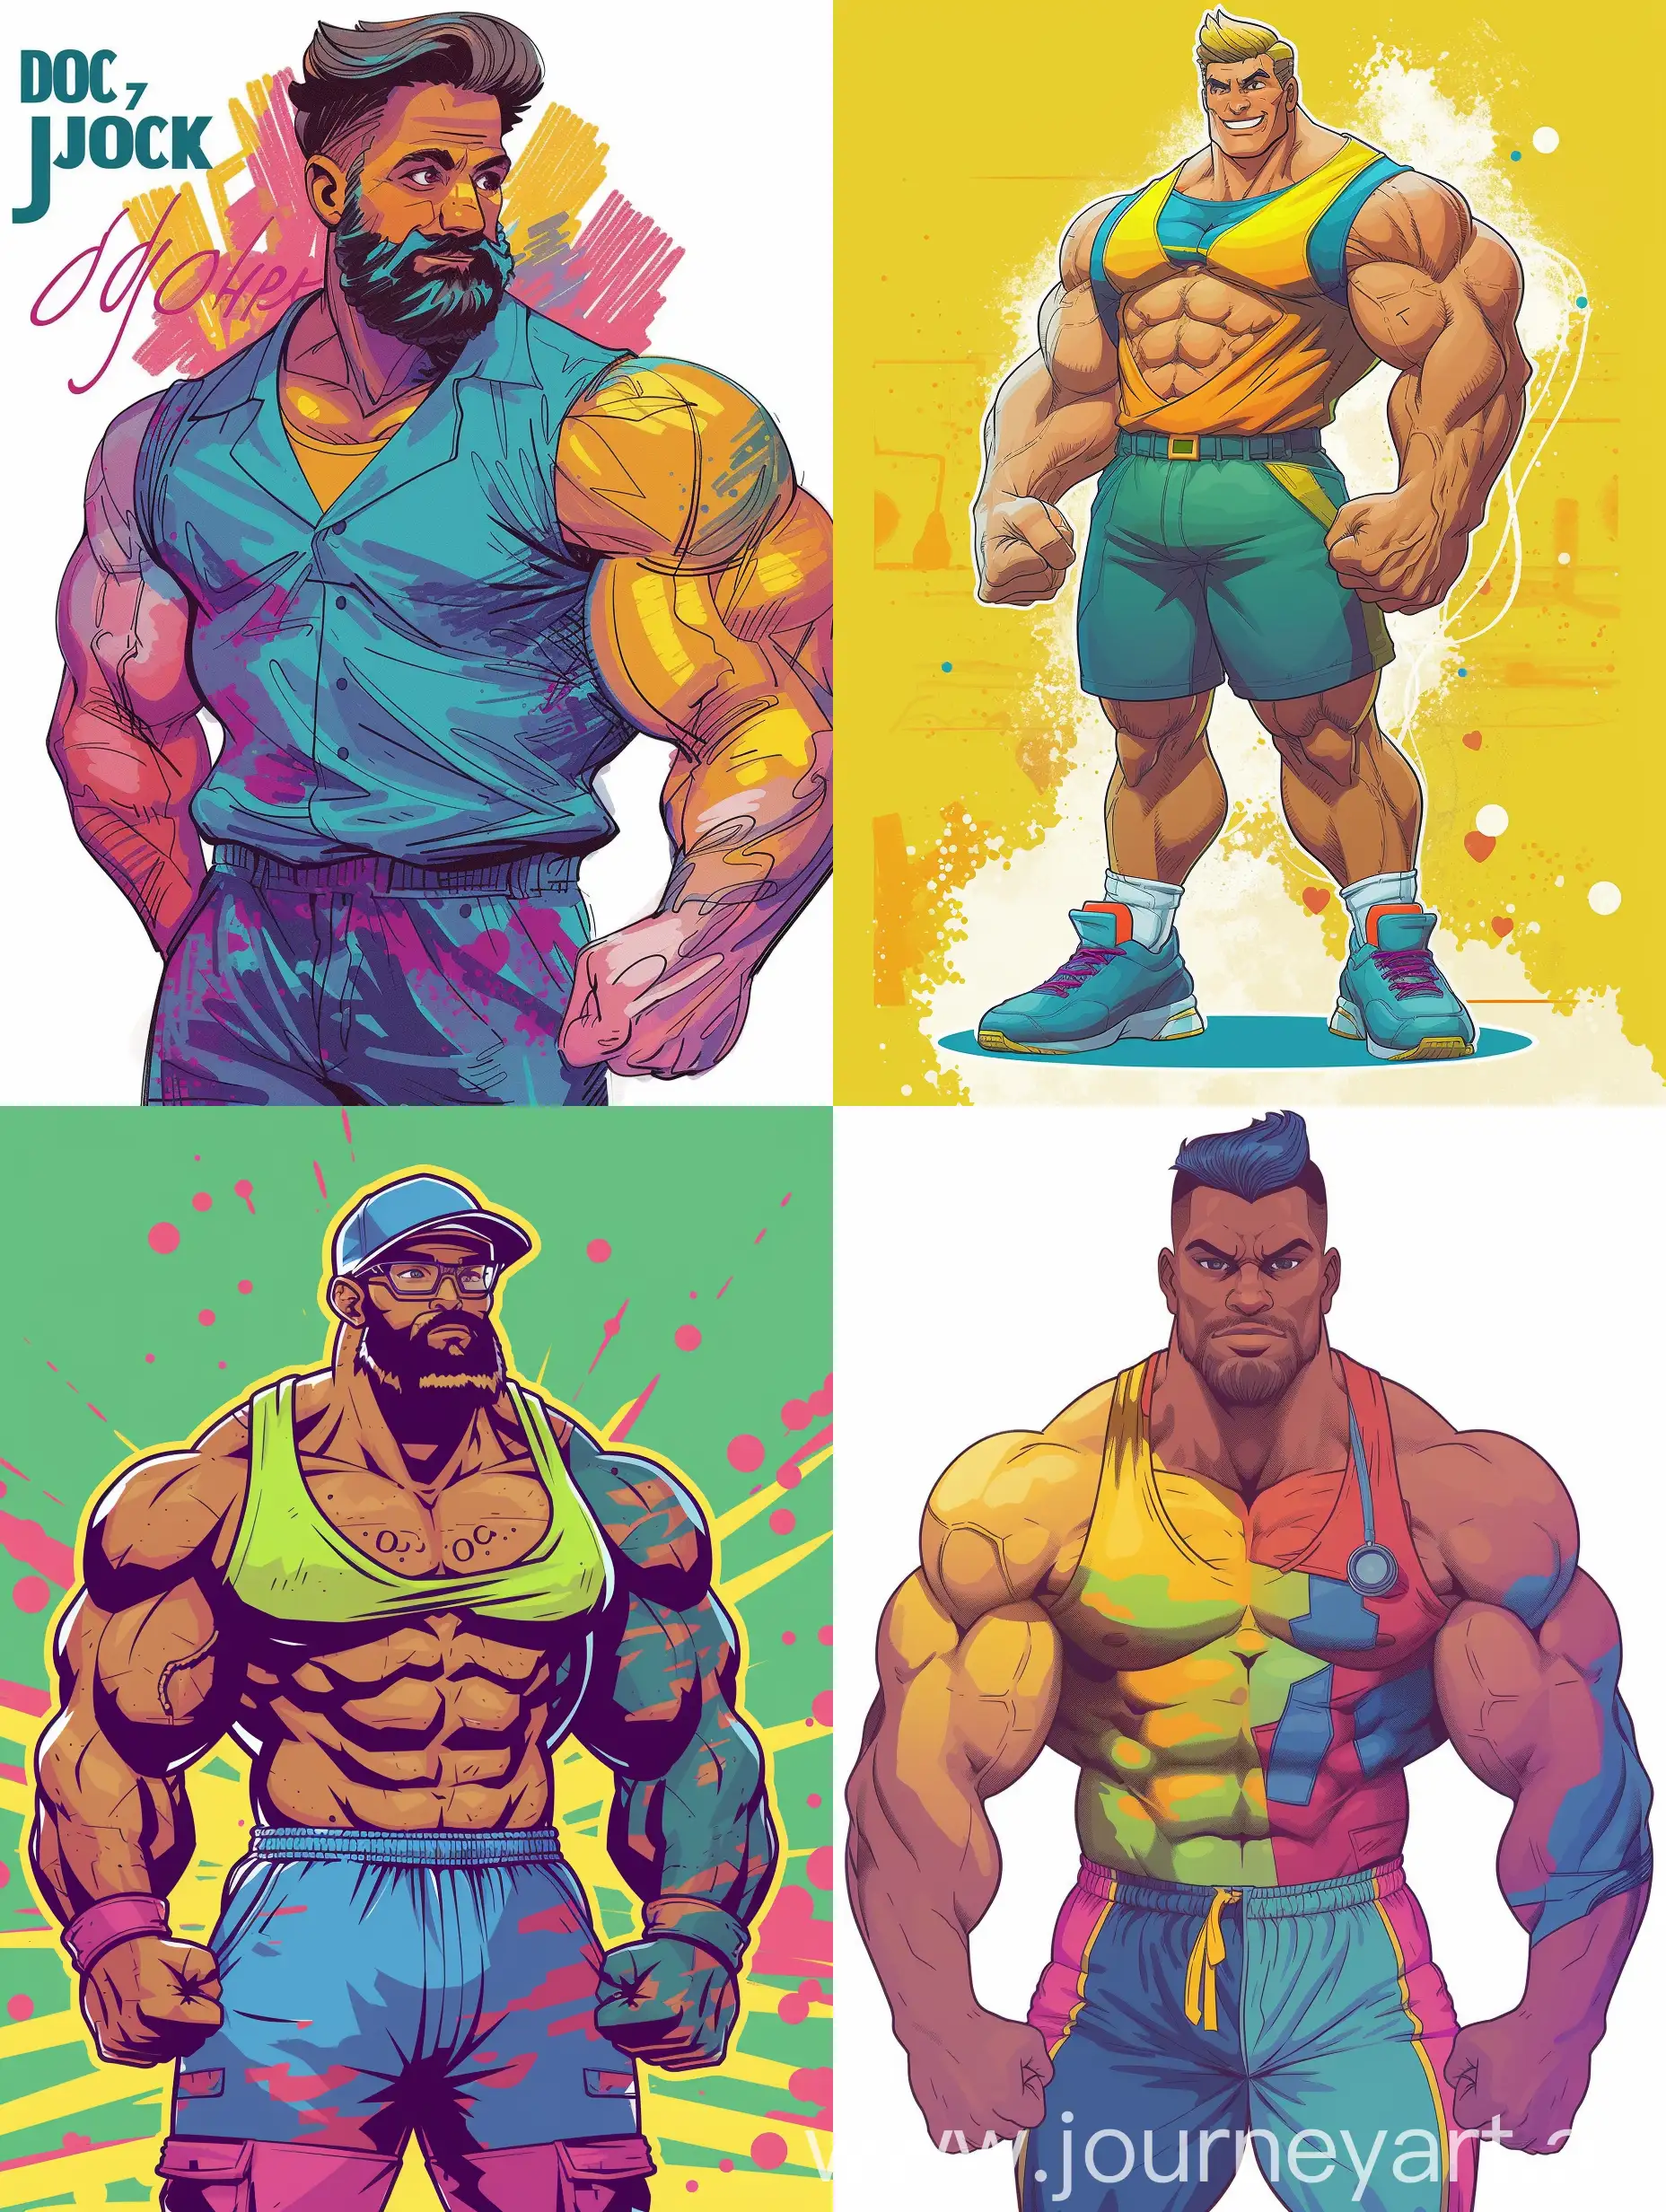 Comic-Style-Gym-Coach-Doc-Jock-the-Wise-and-Adaptable-Gentle-Giant